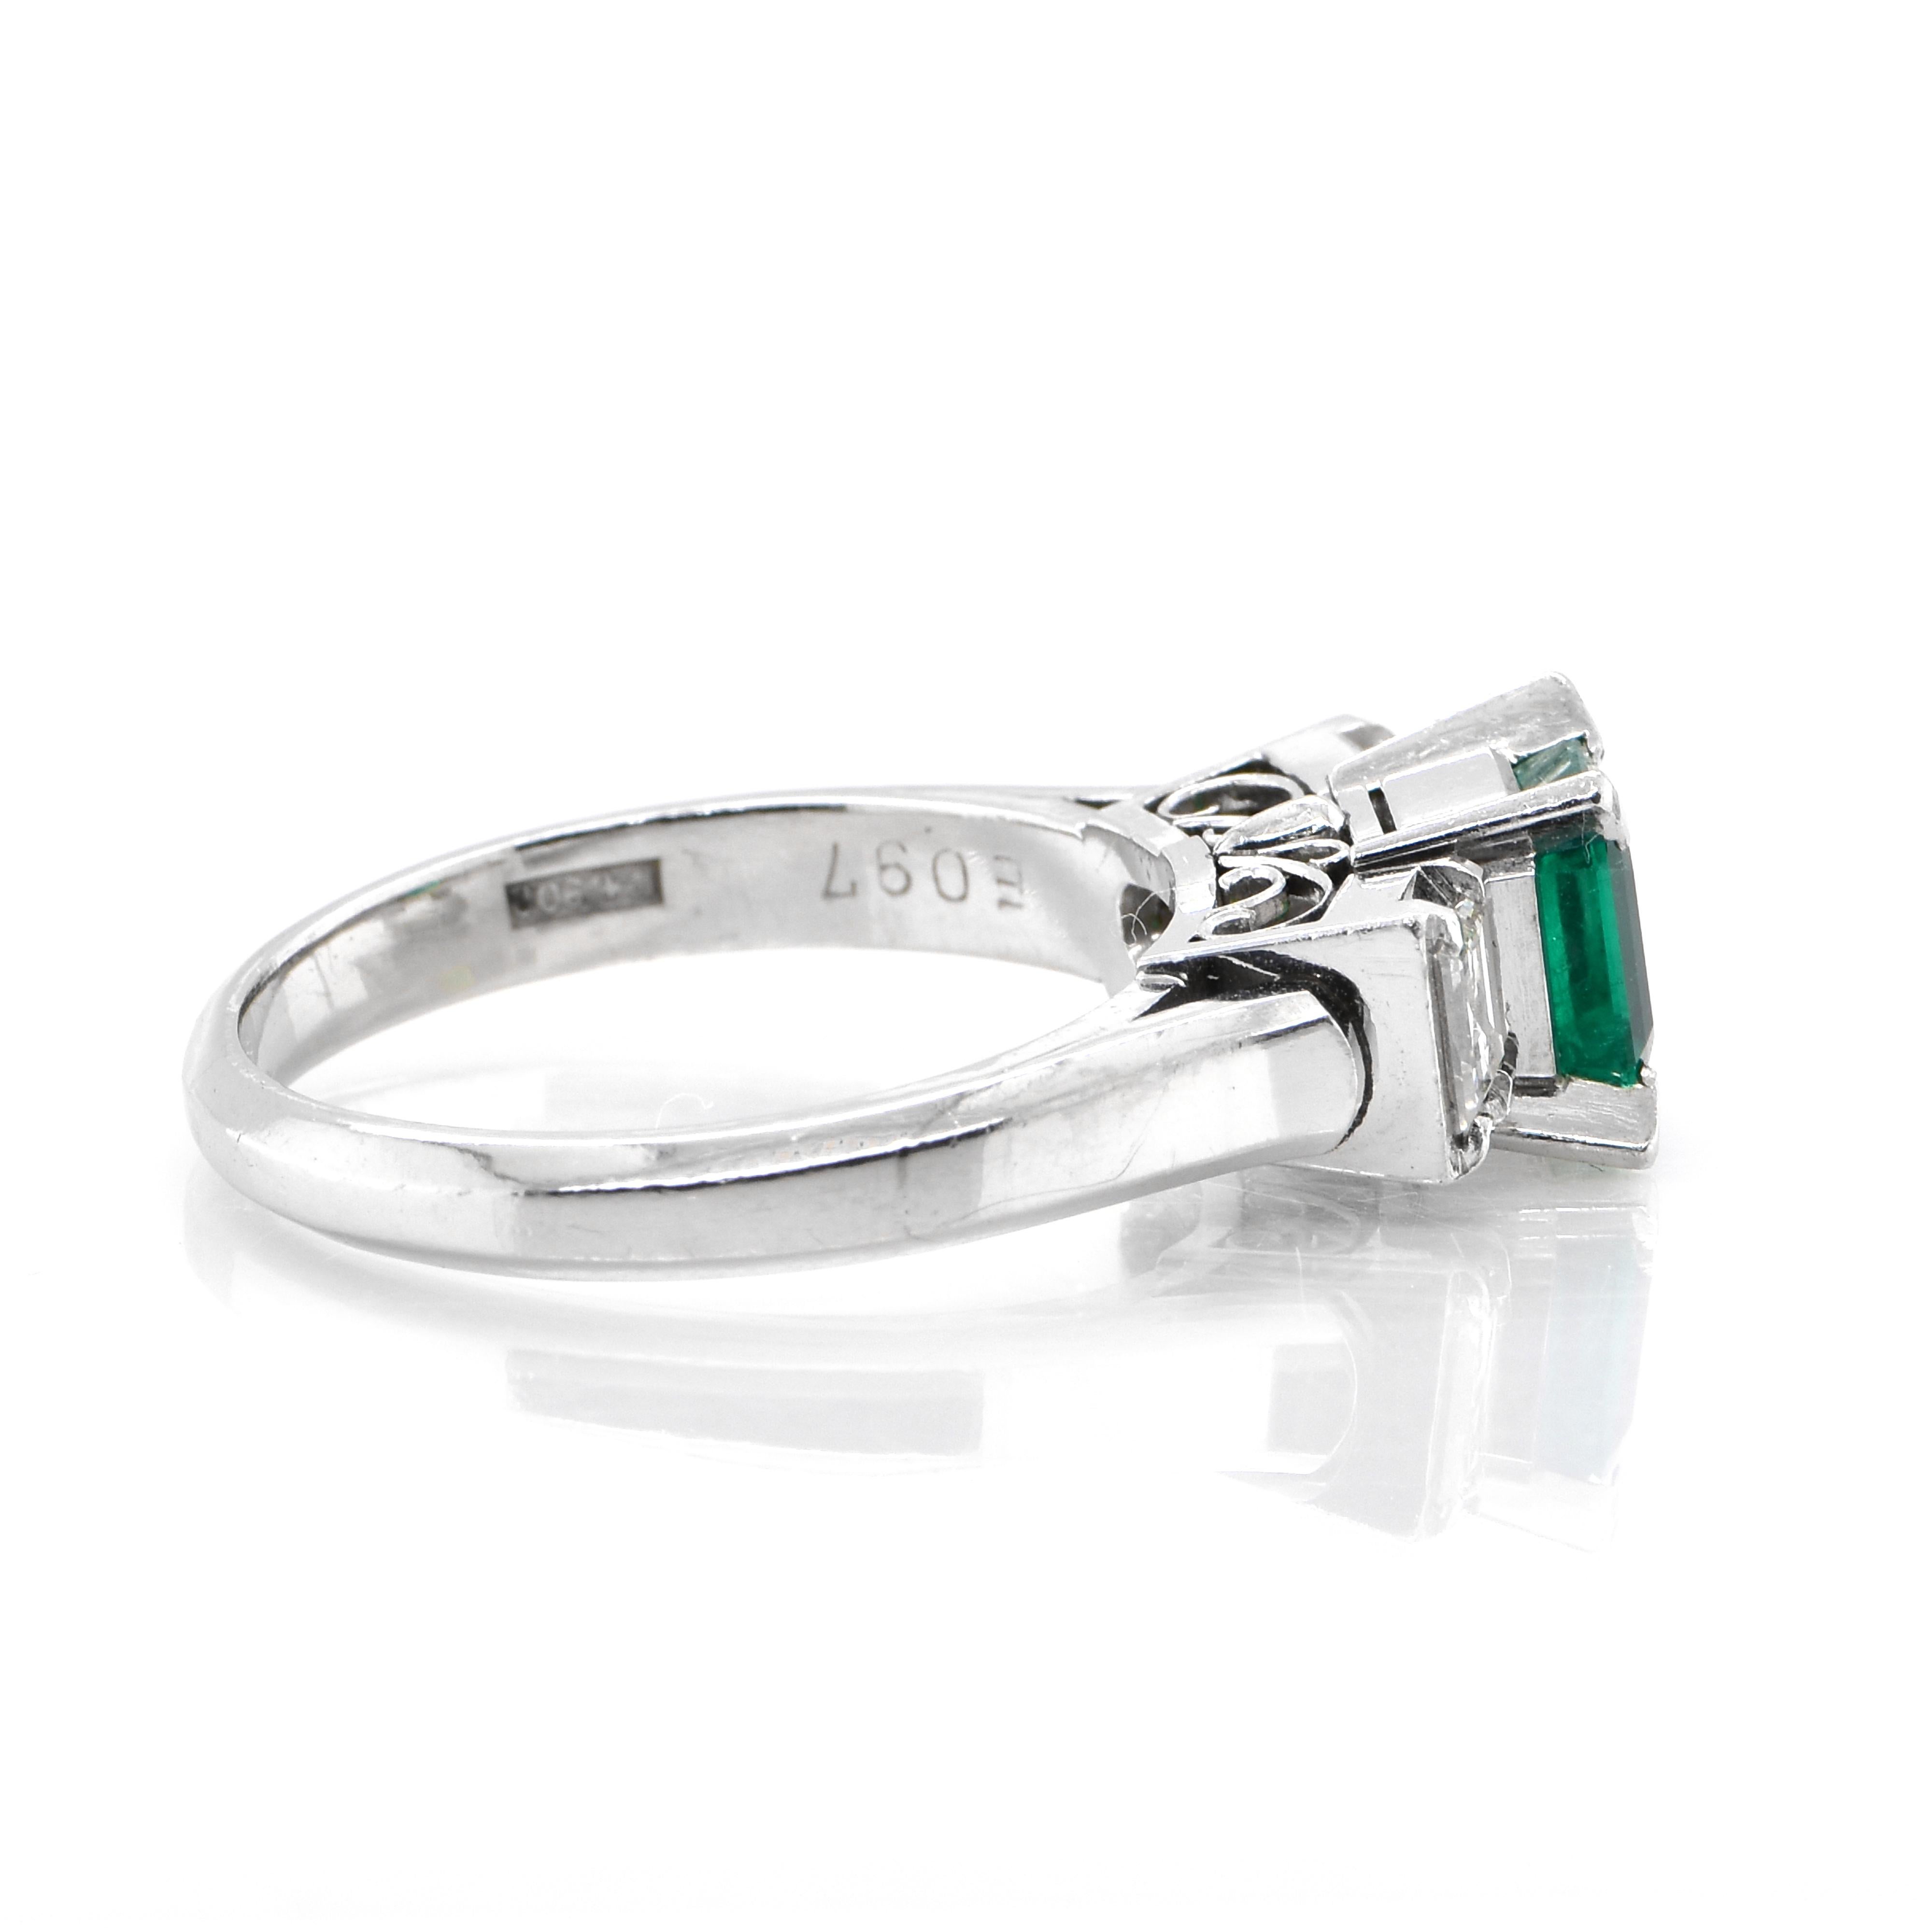 Modern GIA Certified 0.97 Carat 'No Oil' (Untreated), Colombian Emerald & Diamond Ring For Sale